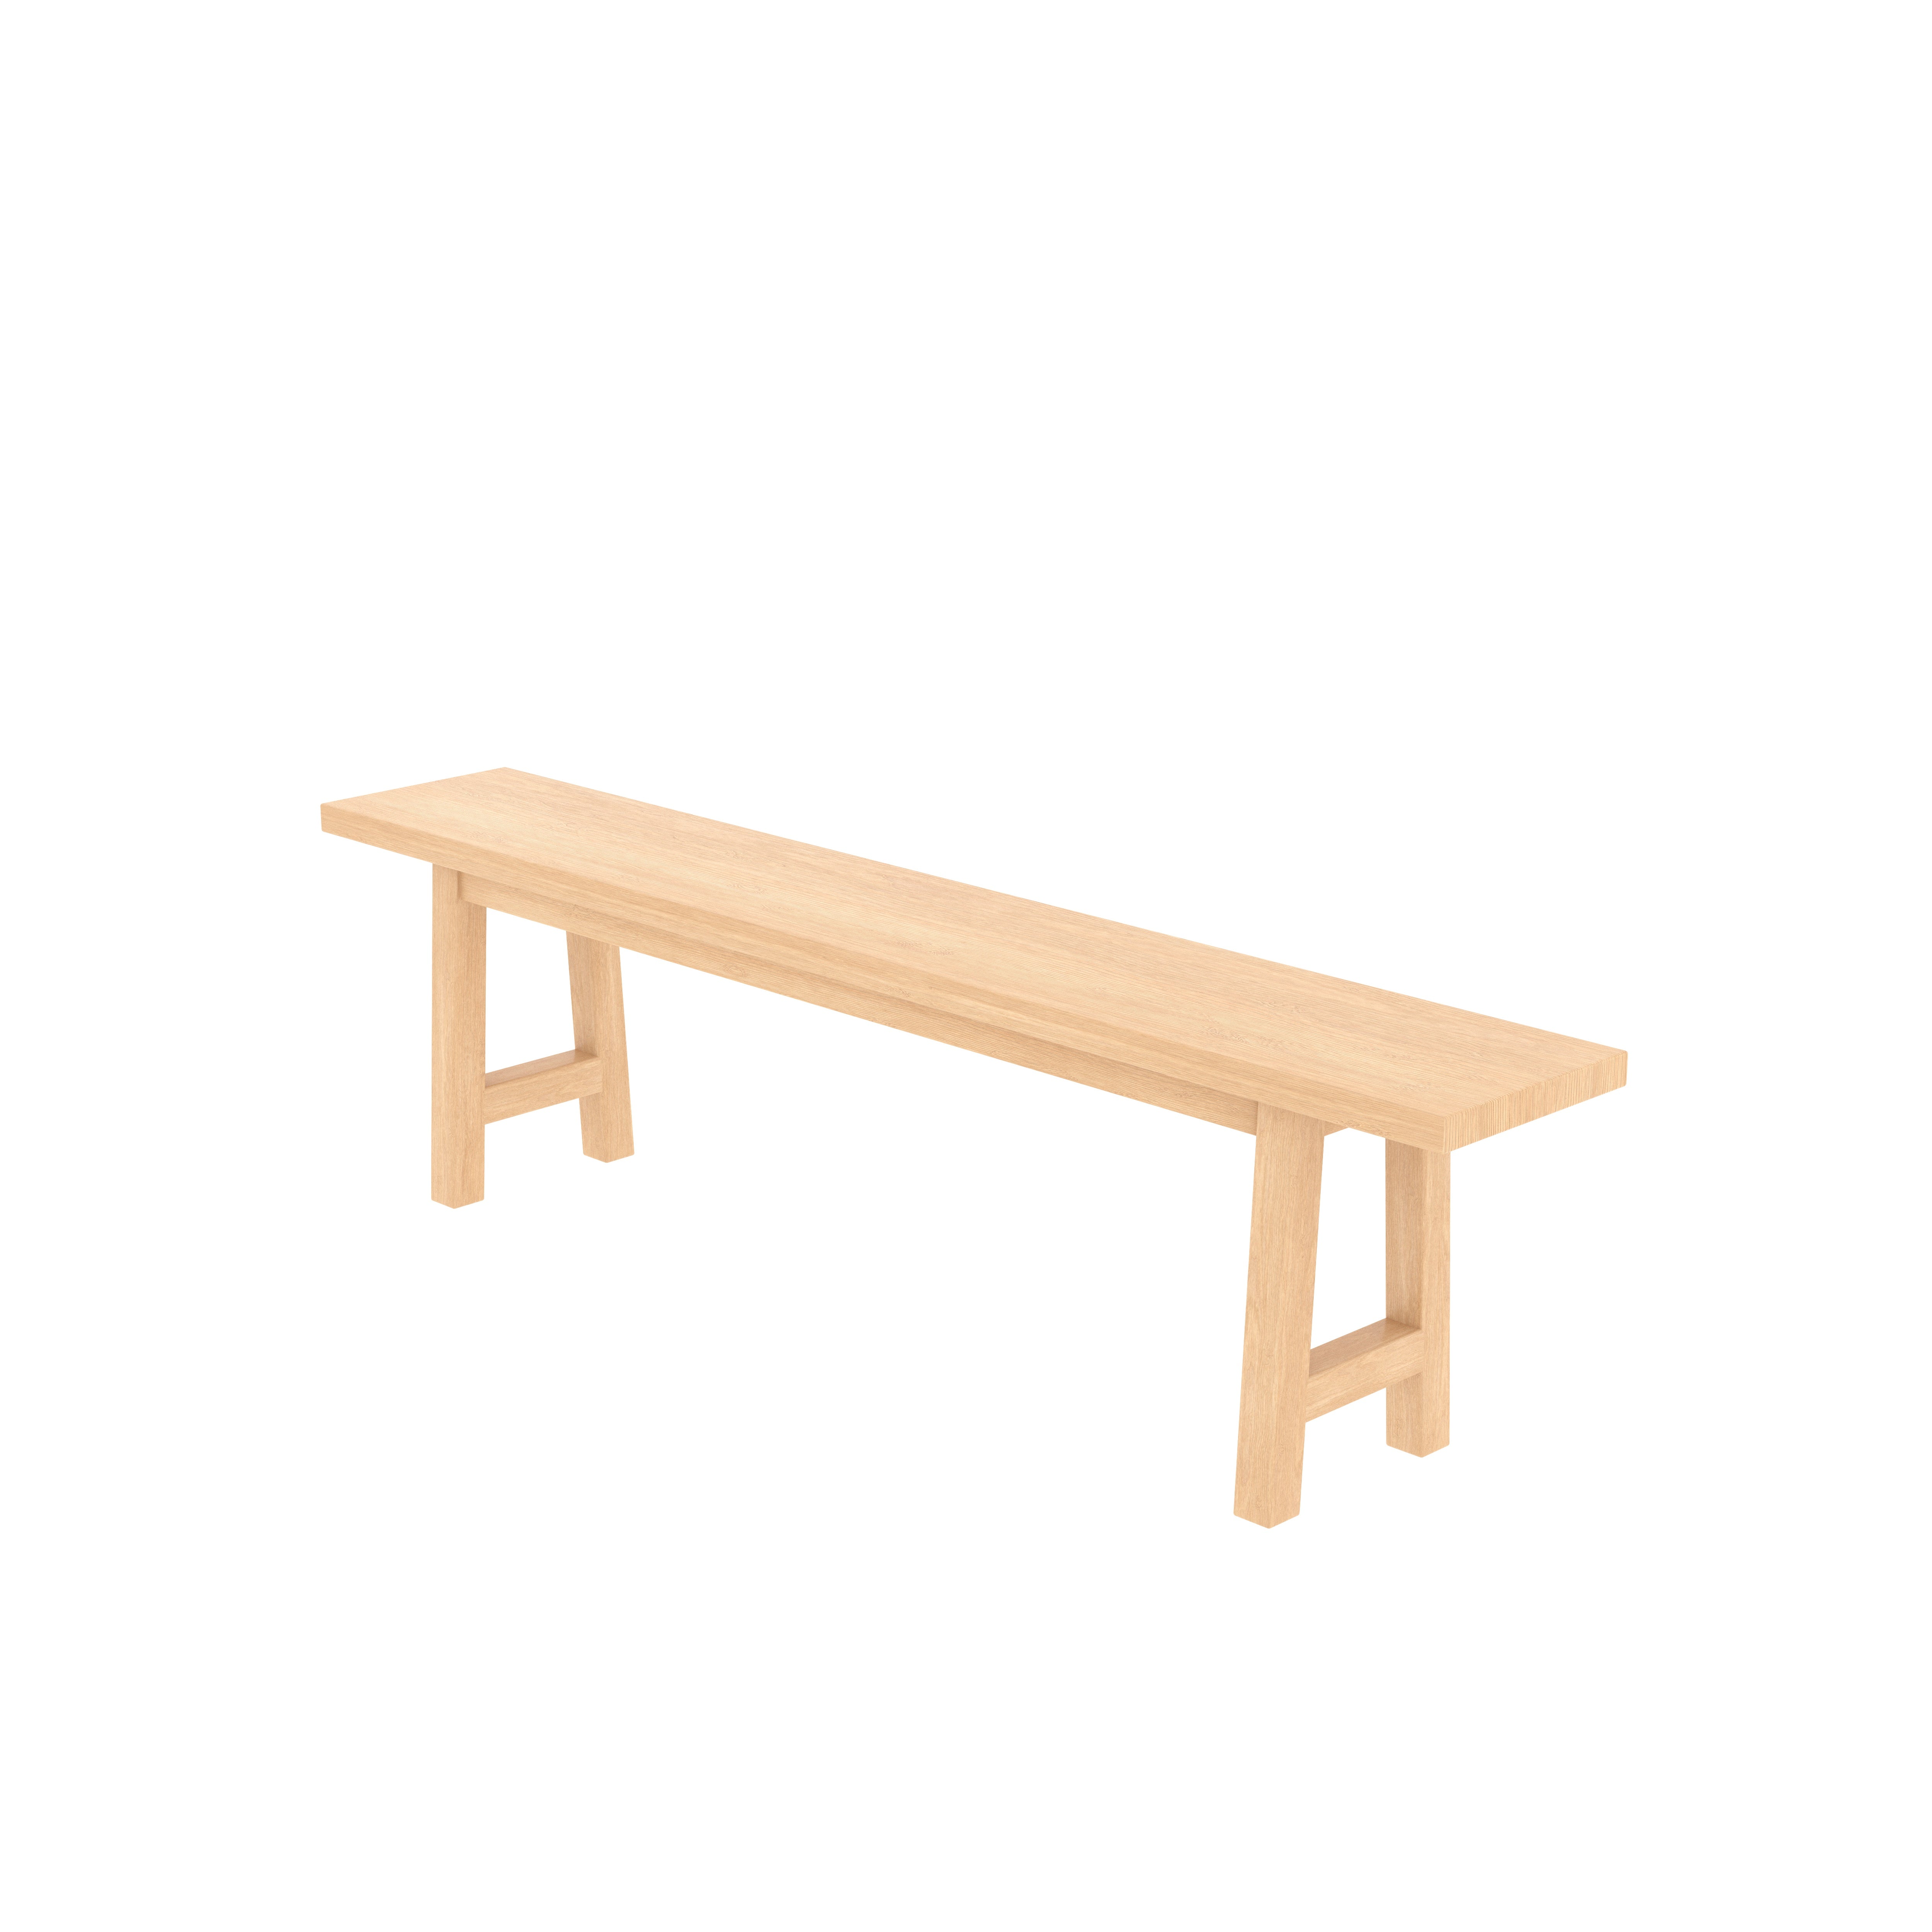 Simple Plain Natural Brown Finished Handmade Wooden Bench Bench